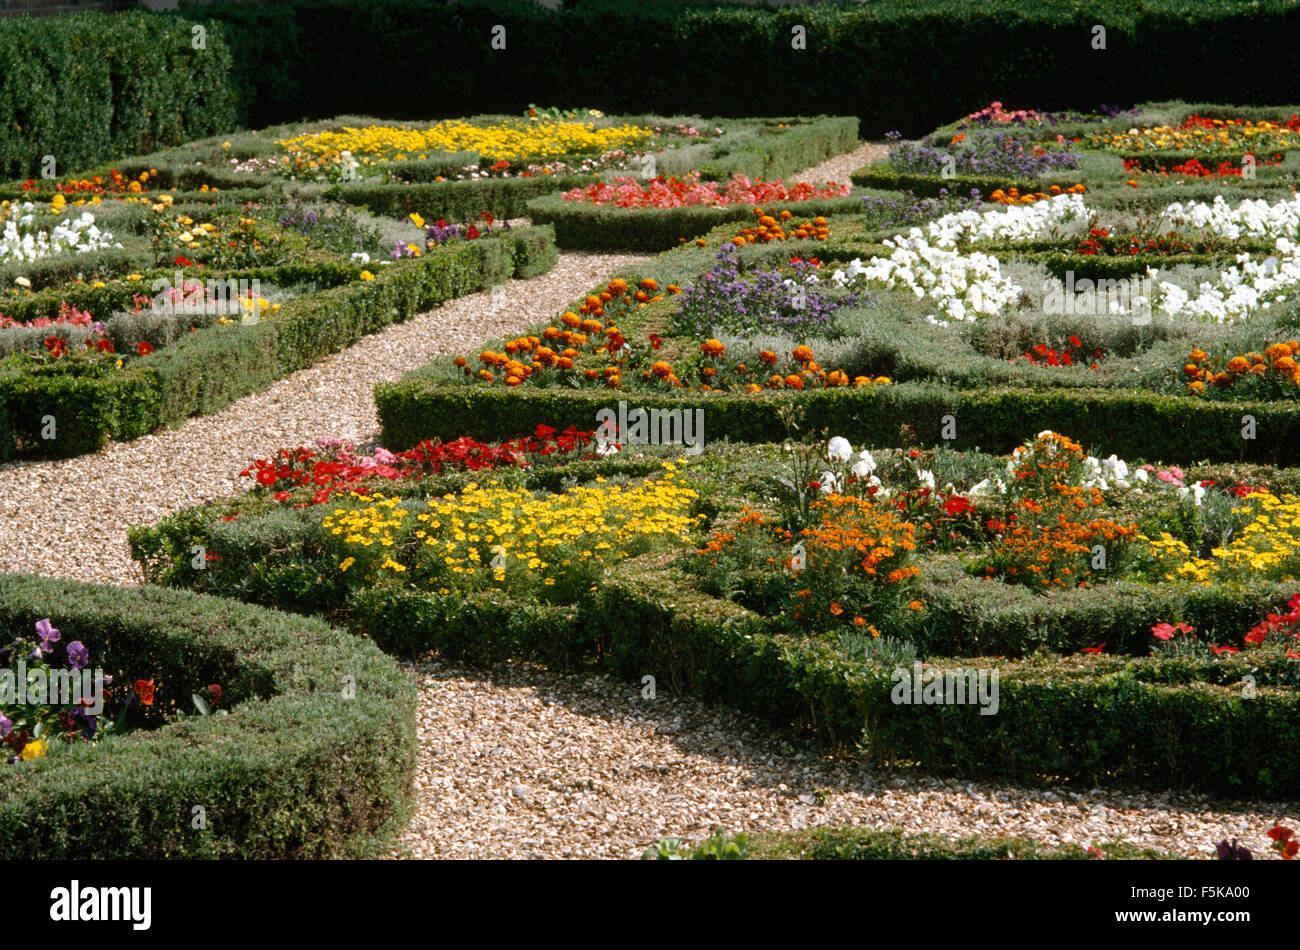 Brightly colored annuals box edged beds in a large formal parterre garden Stock Photo